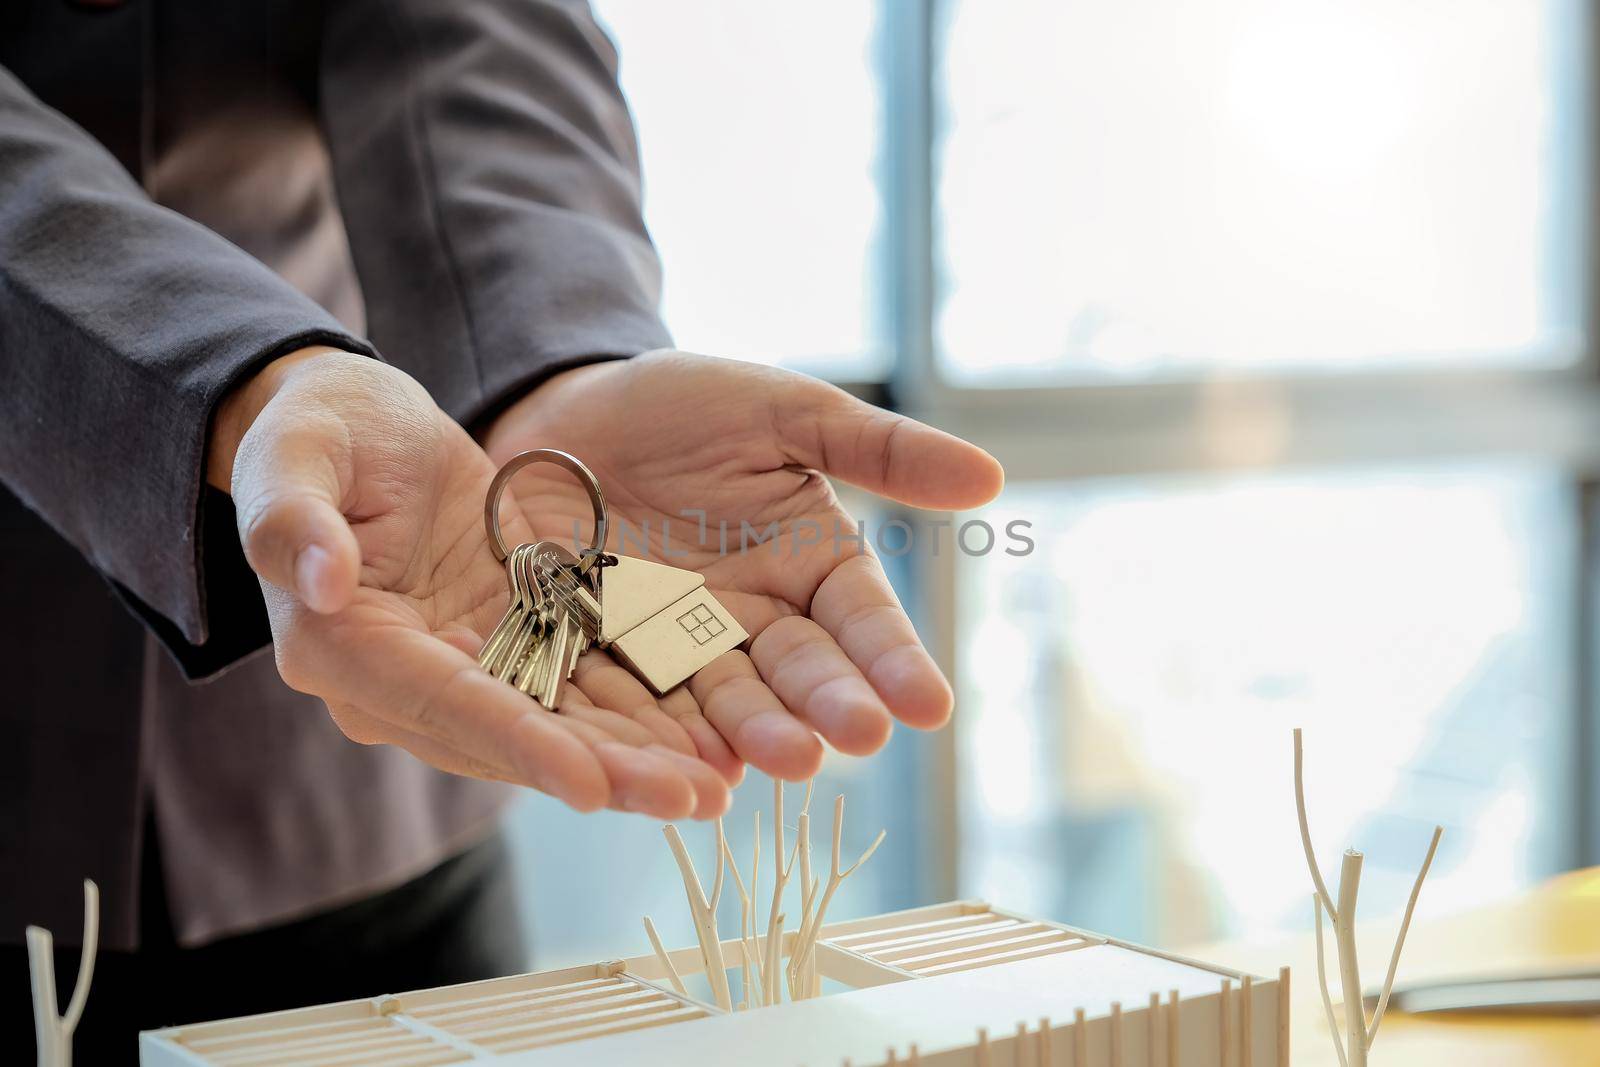 Real estate agent handing over house keys with approved mortgage application form and offer handshake.